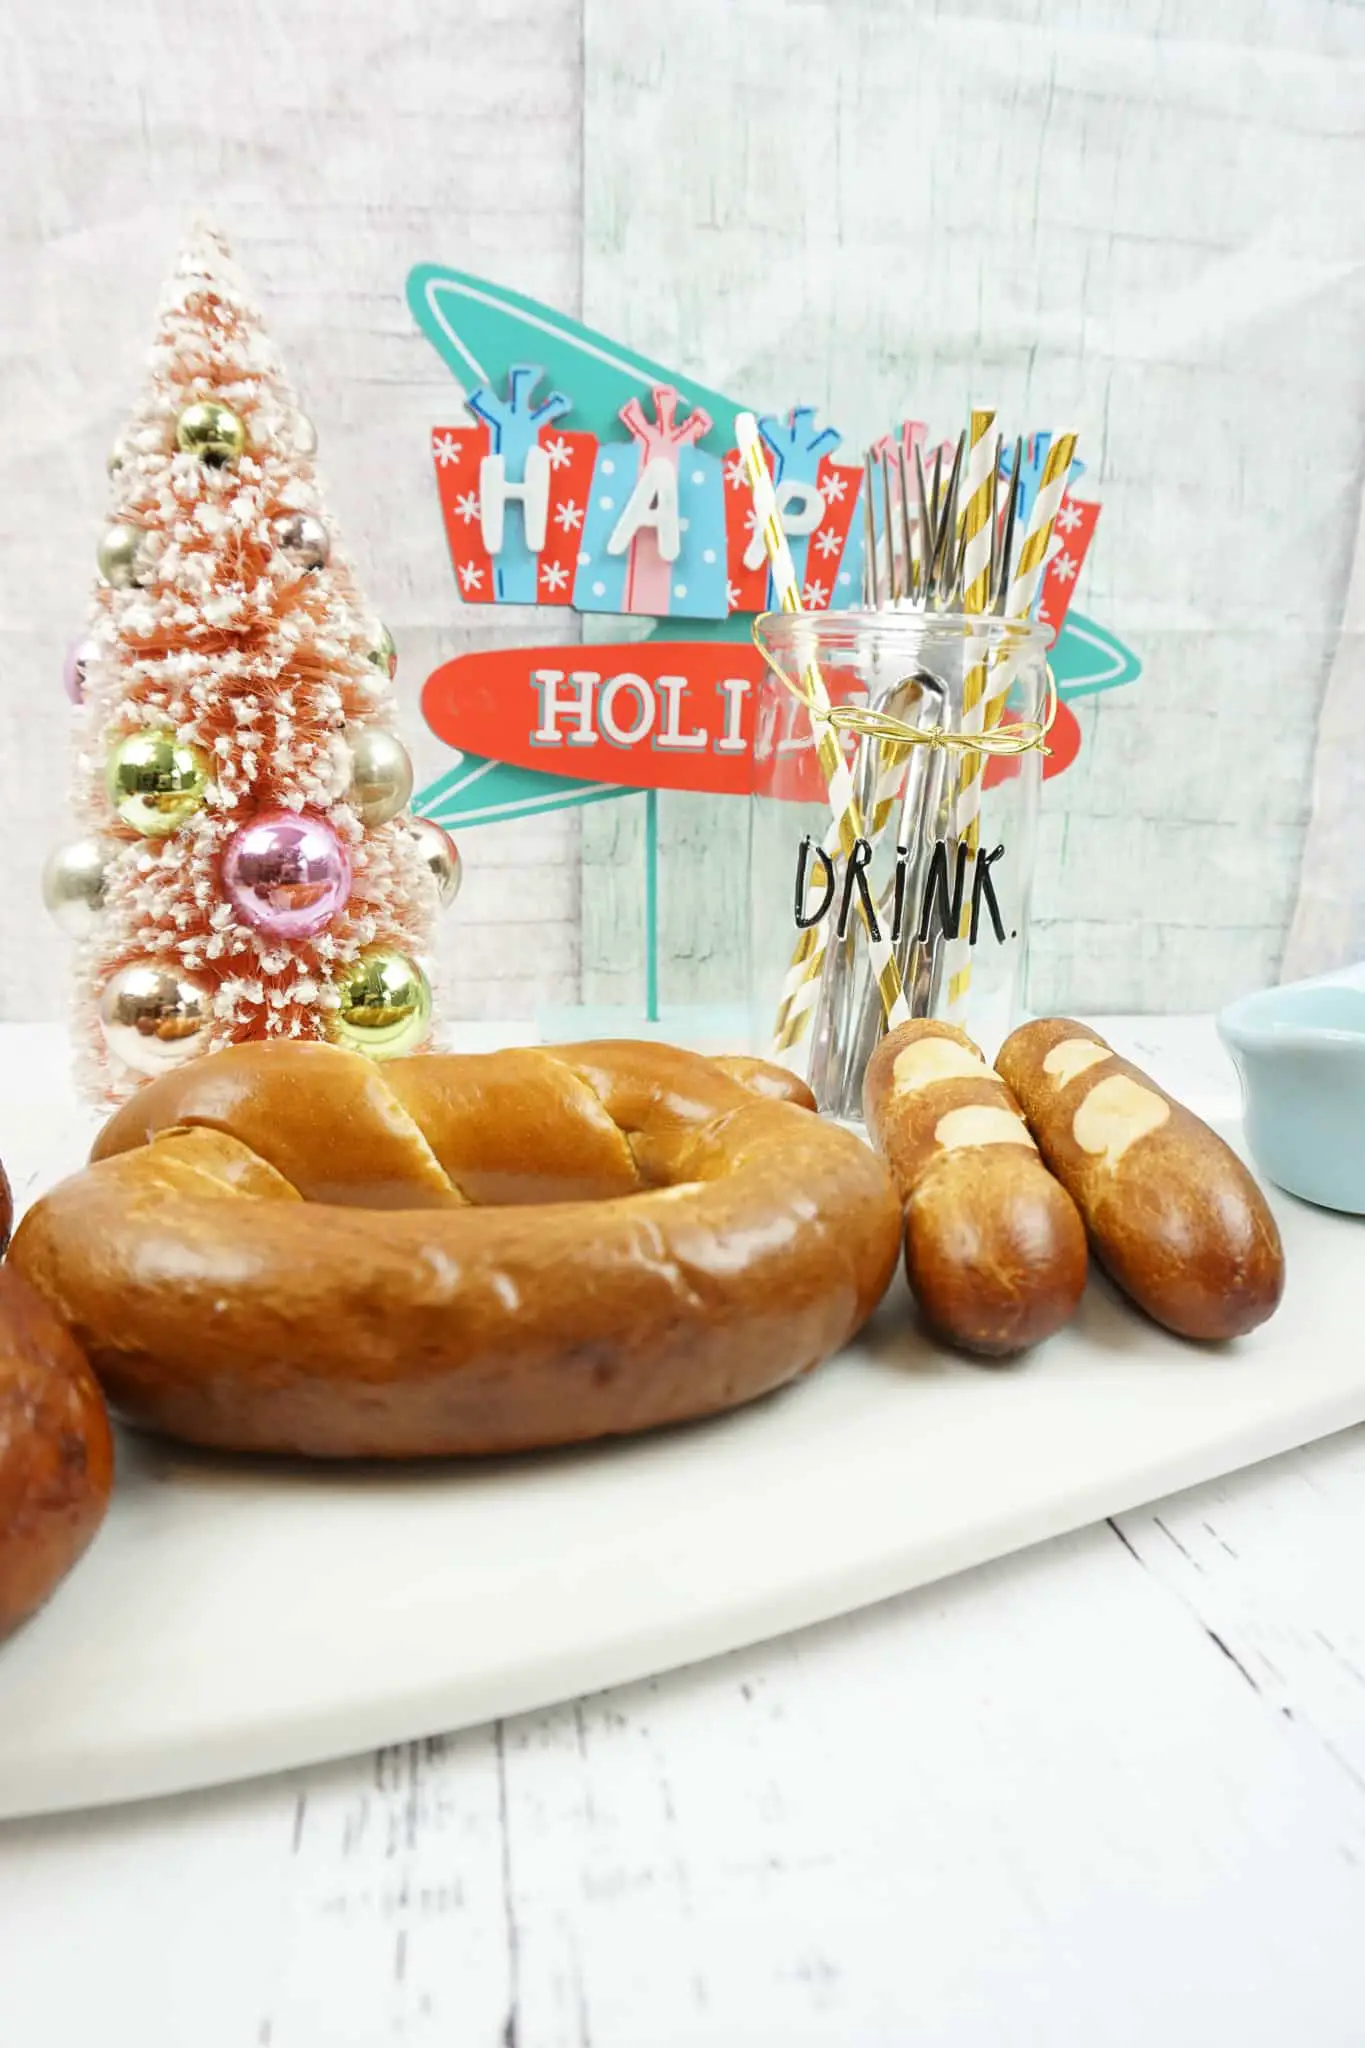 The Perfect Pretzel For Your Next Party Or a Great Gift For Dad!